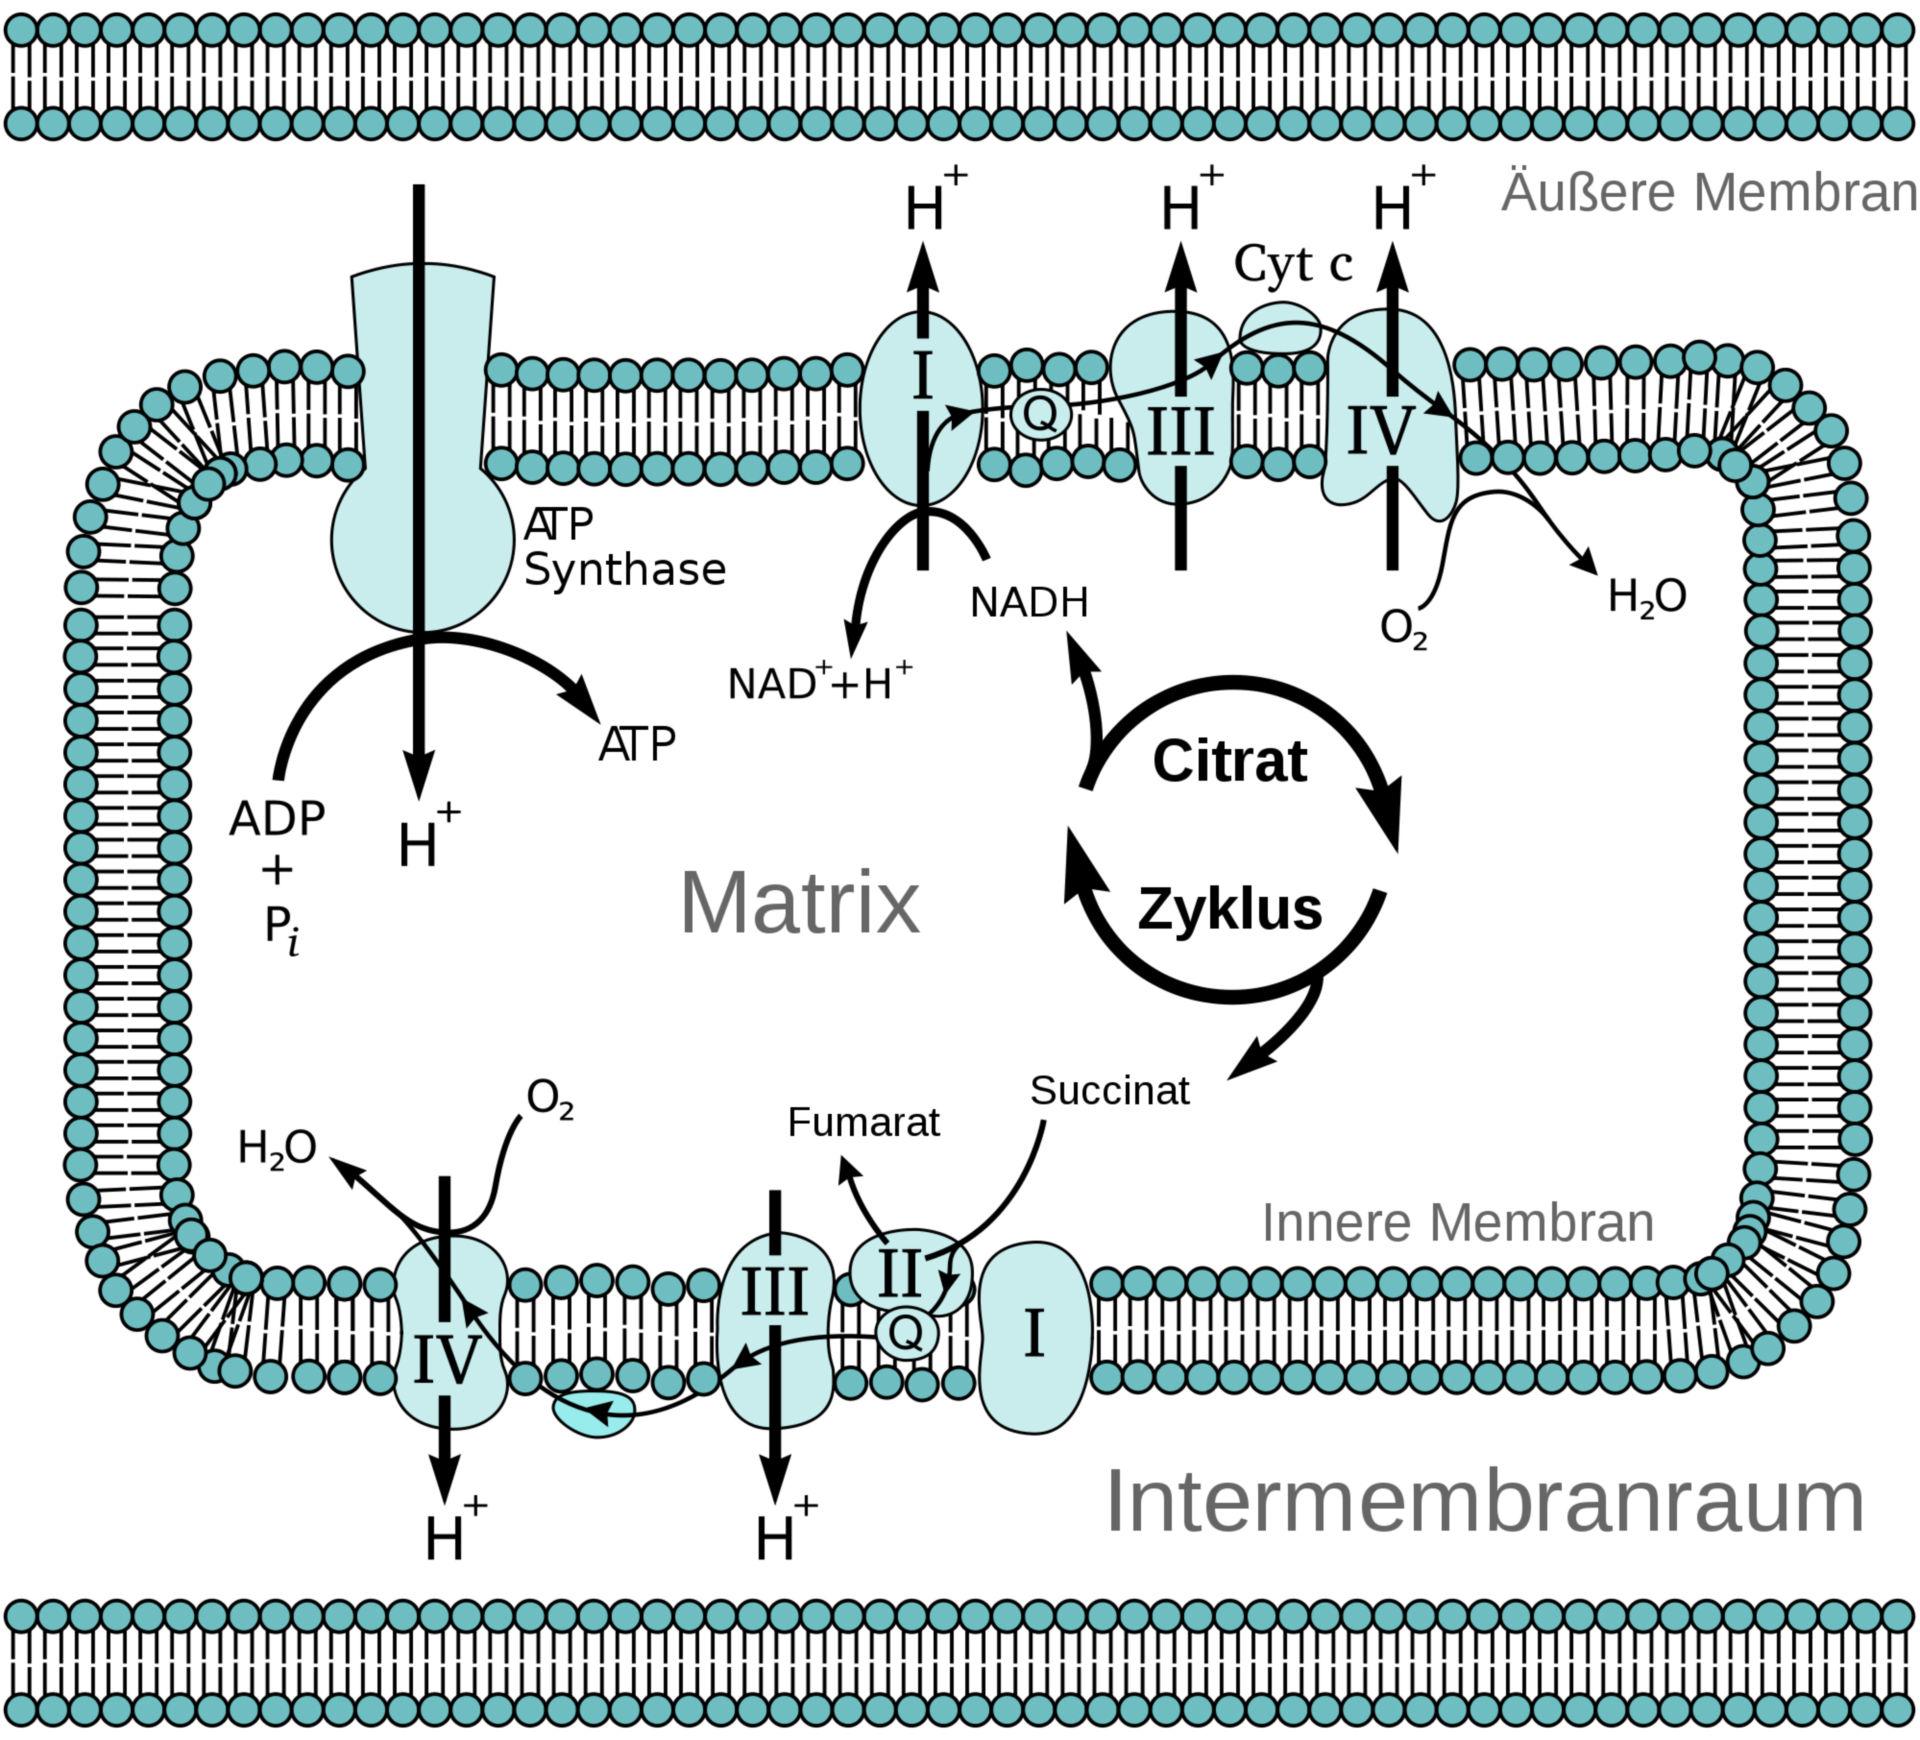 Mitochondrial electron transport chain